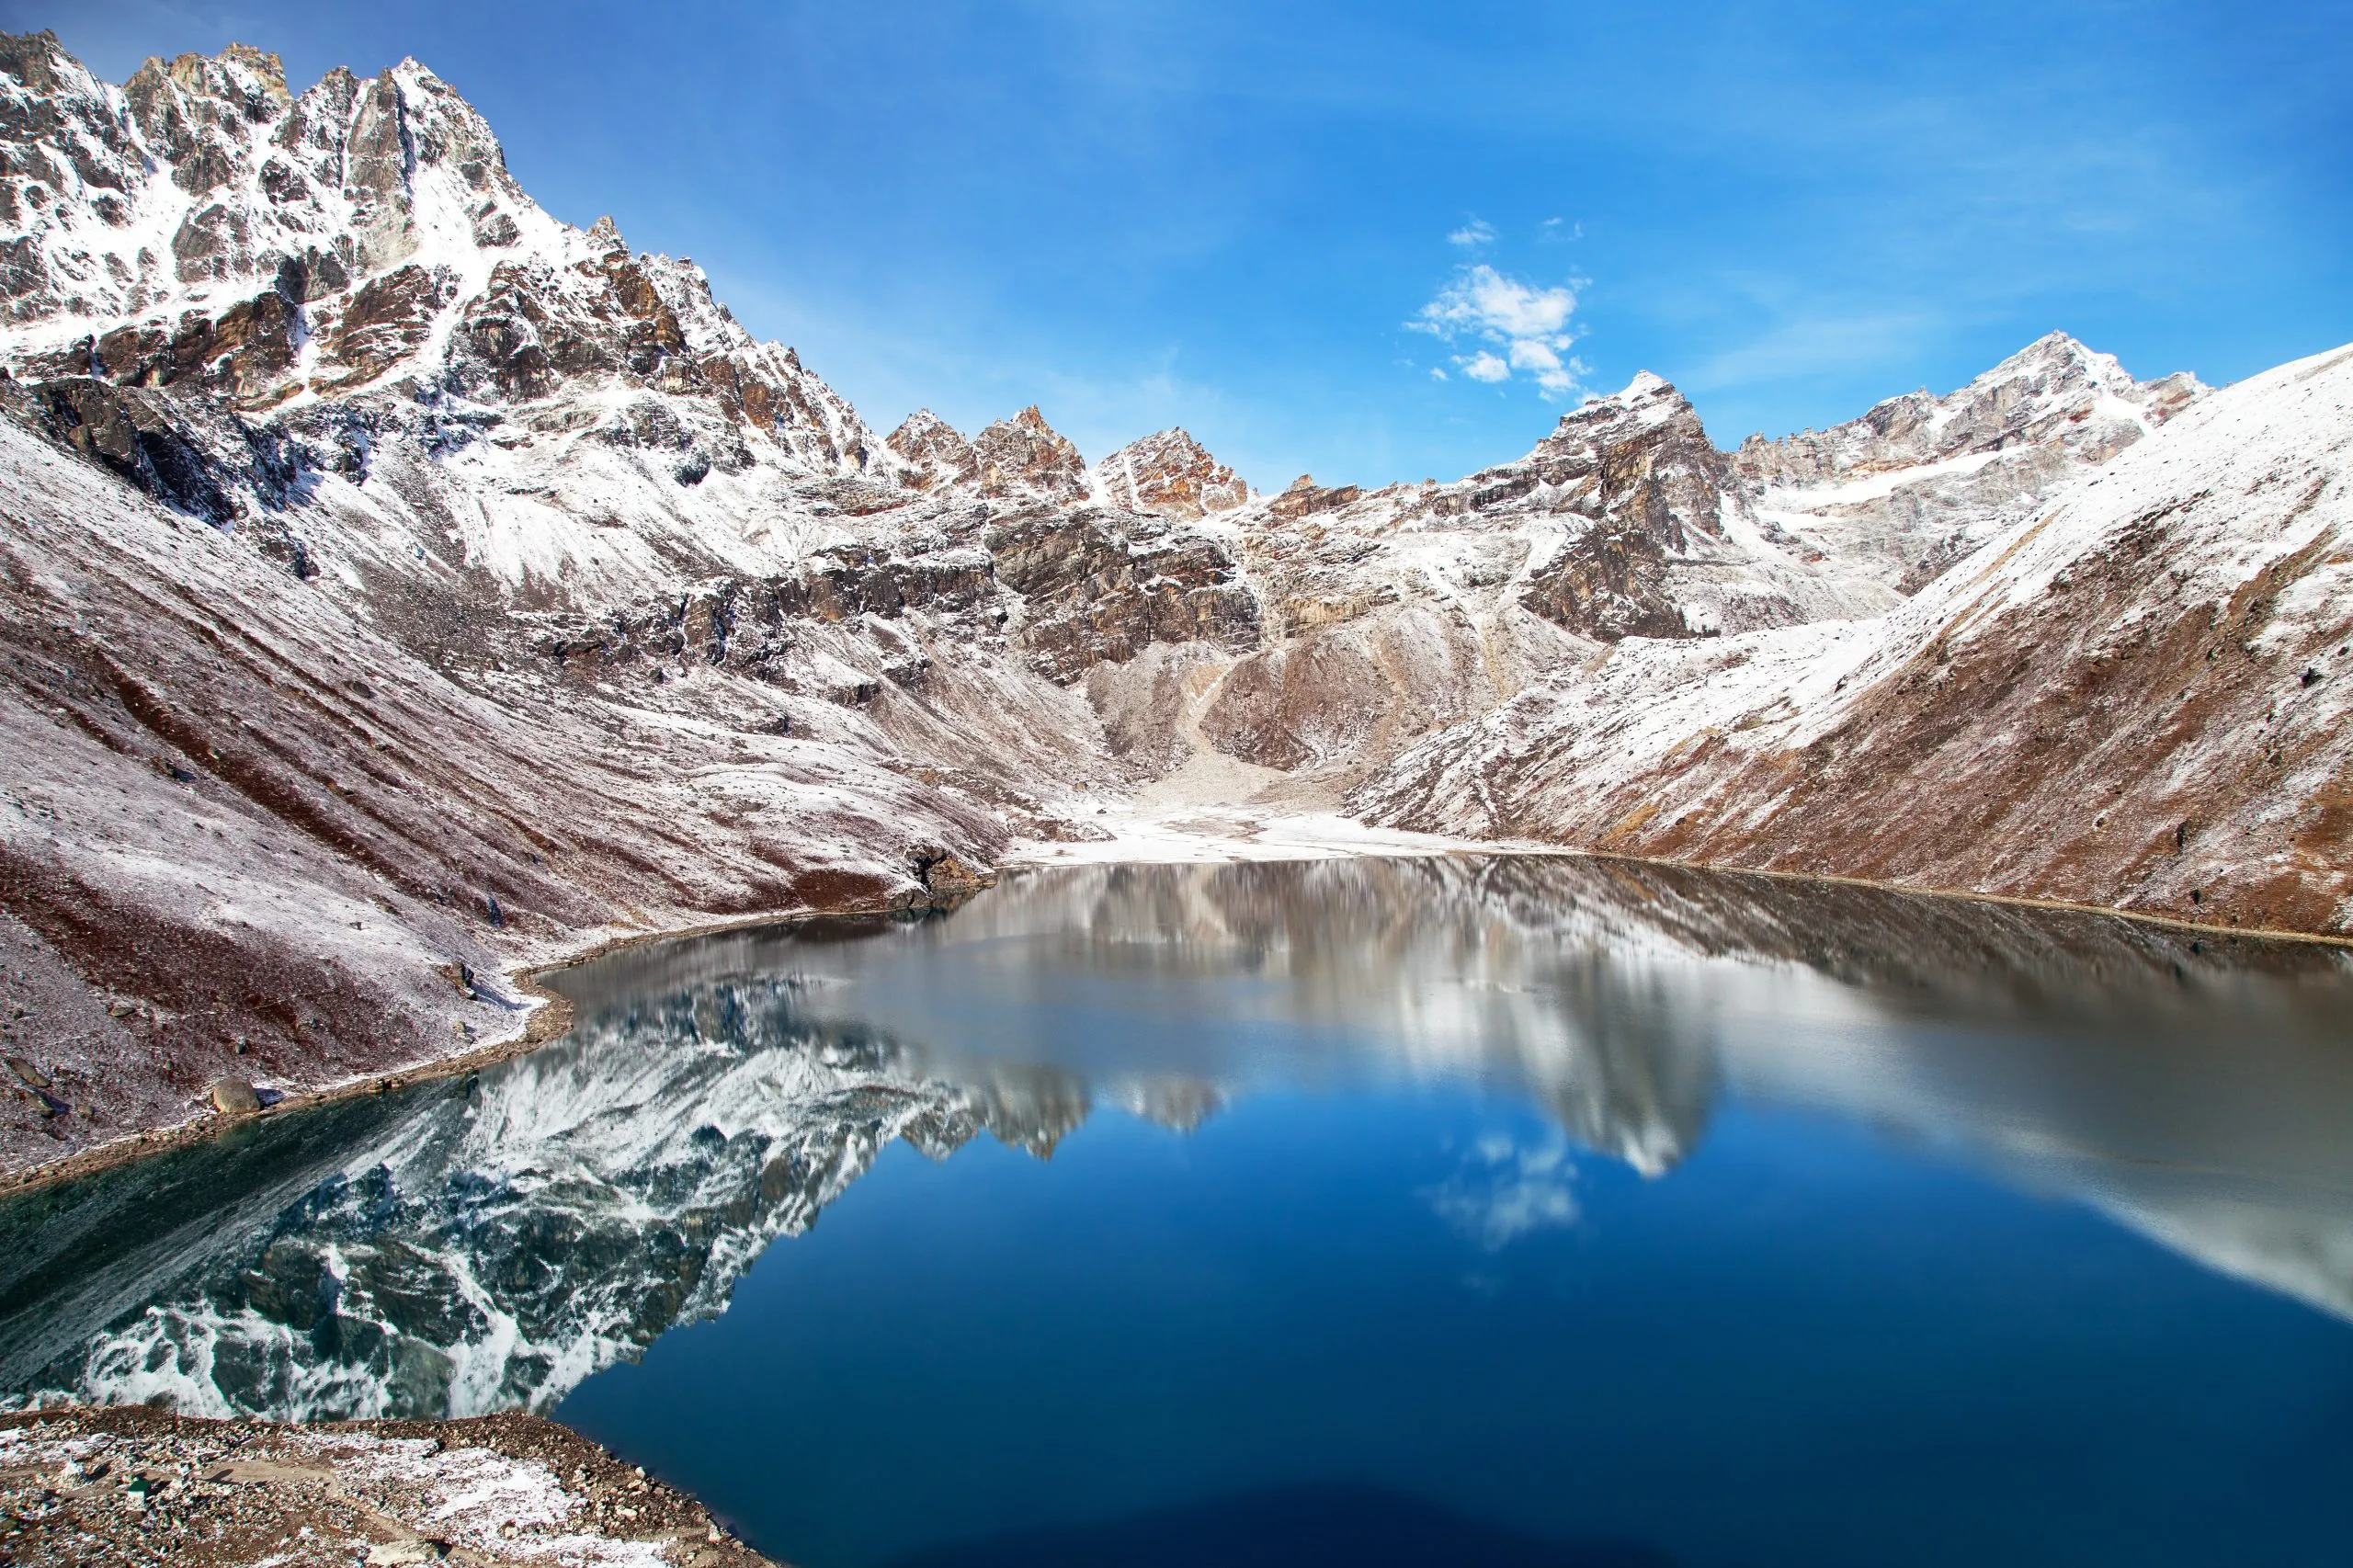 Snow-capped peaks around Gokyo lake will leave you speecless